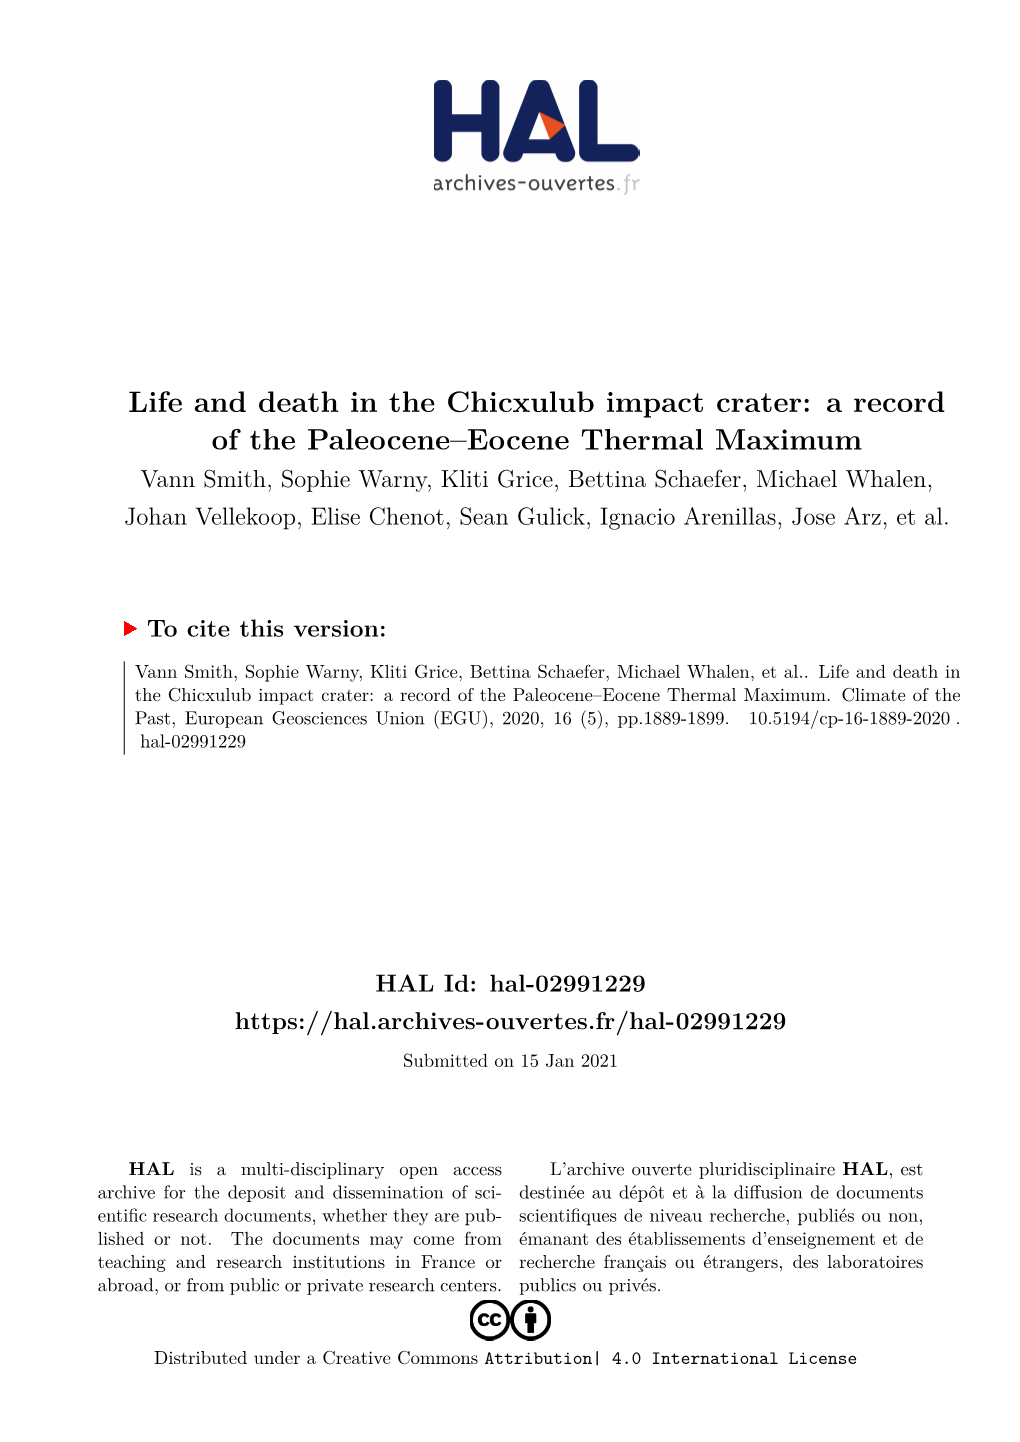 Life and Death in the Chicxulub Impact Crater